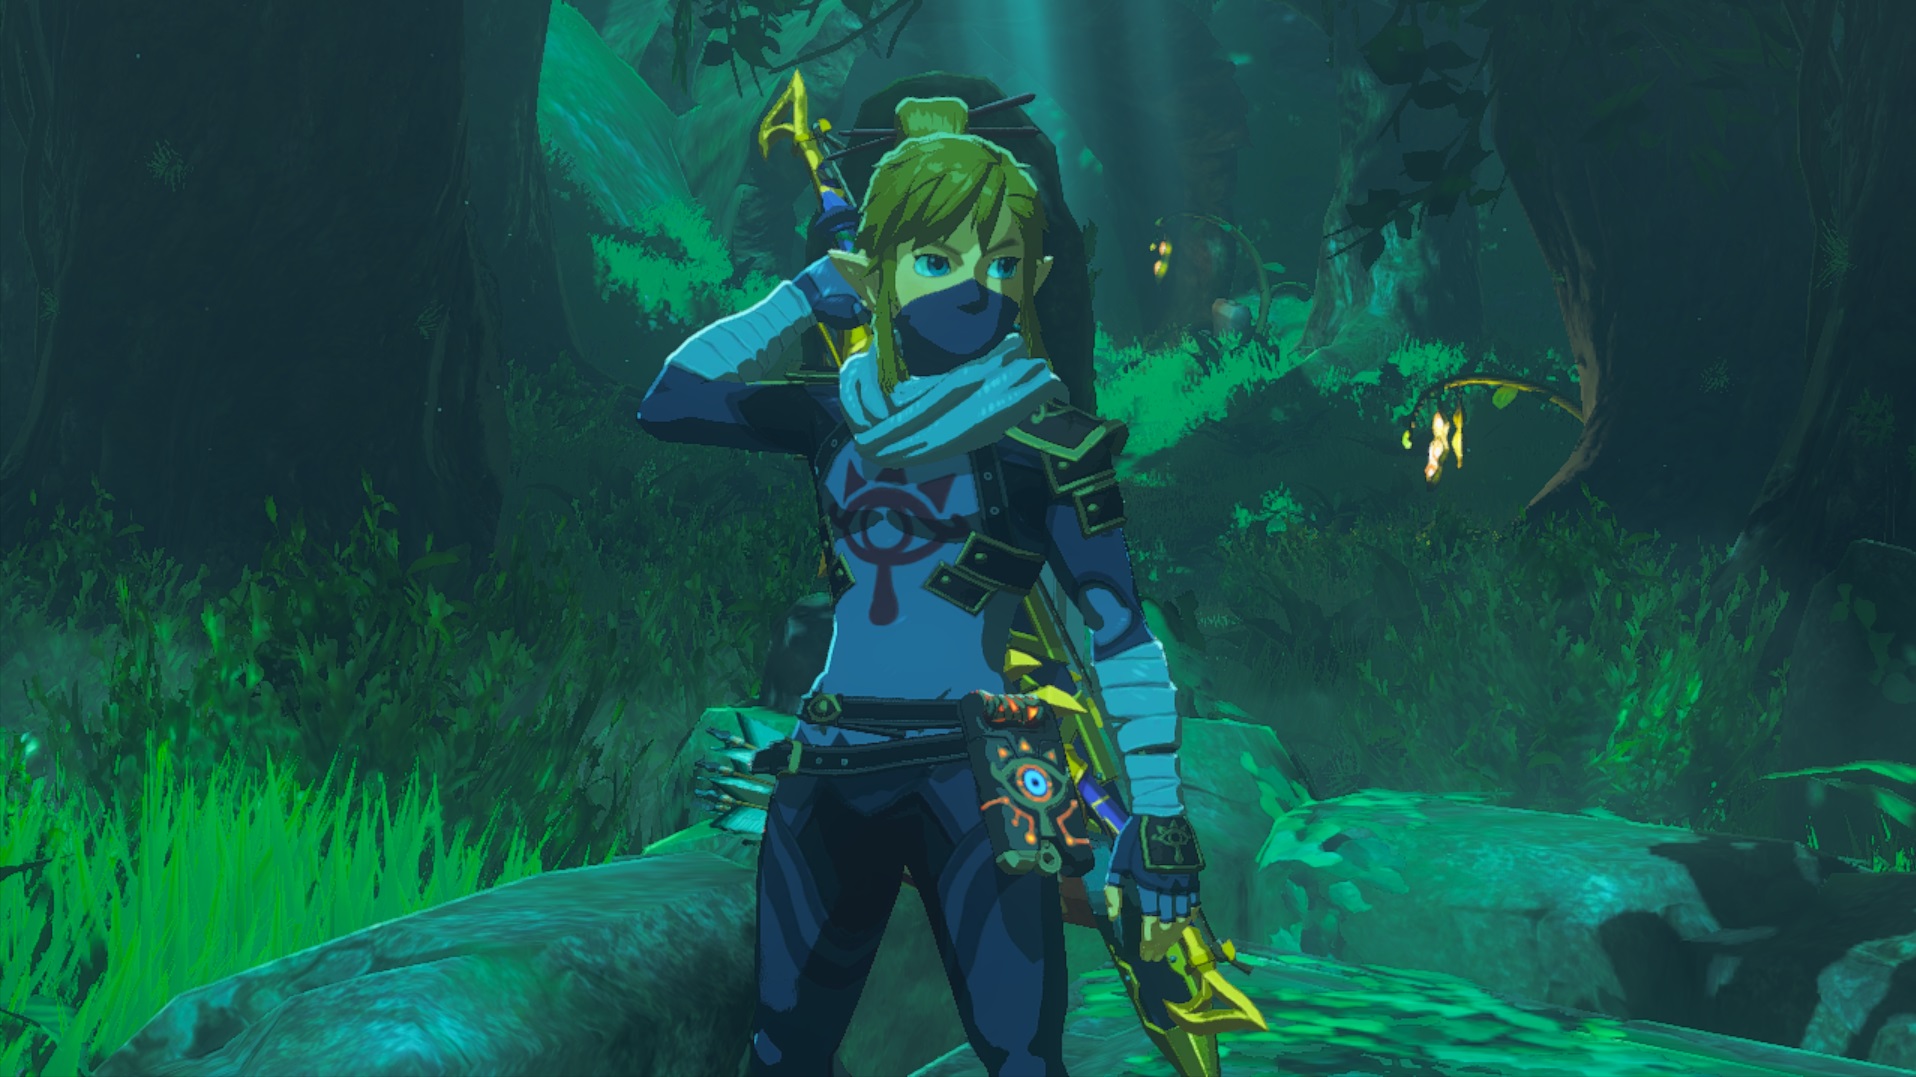 The Legend of Zelda: Breath of the Wild - The Sheikah Outfit